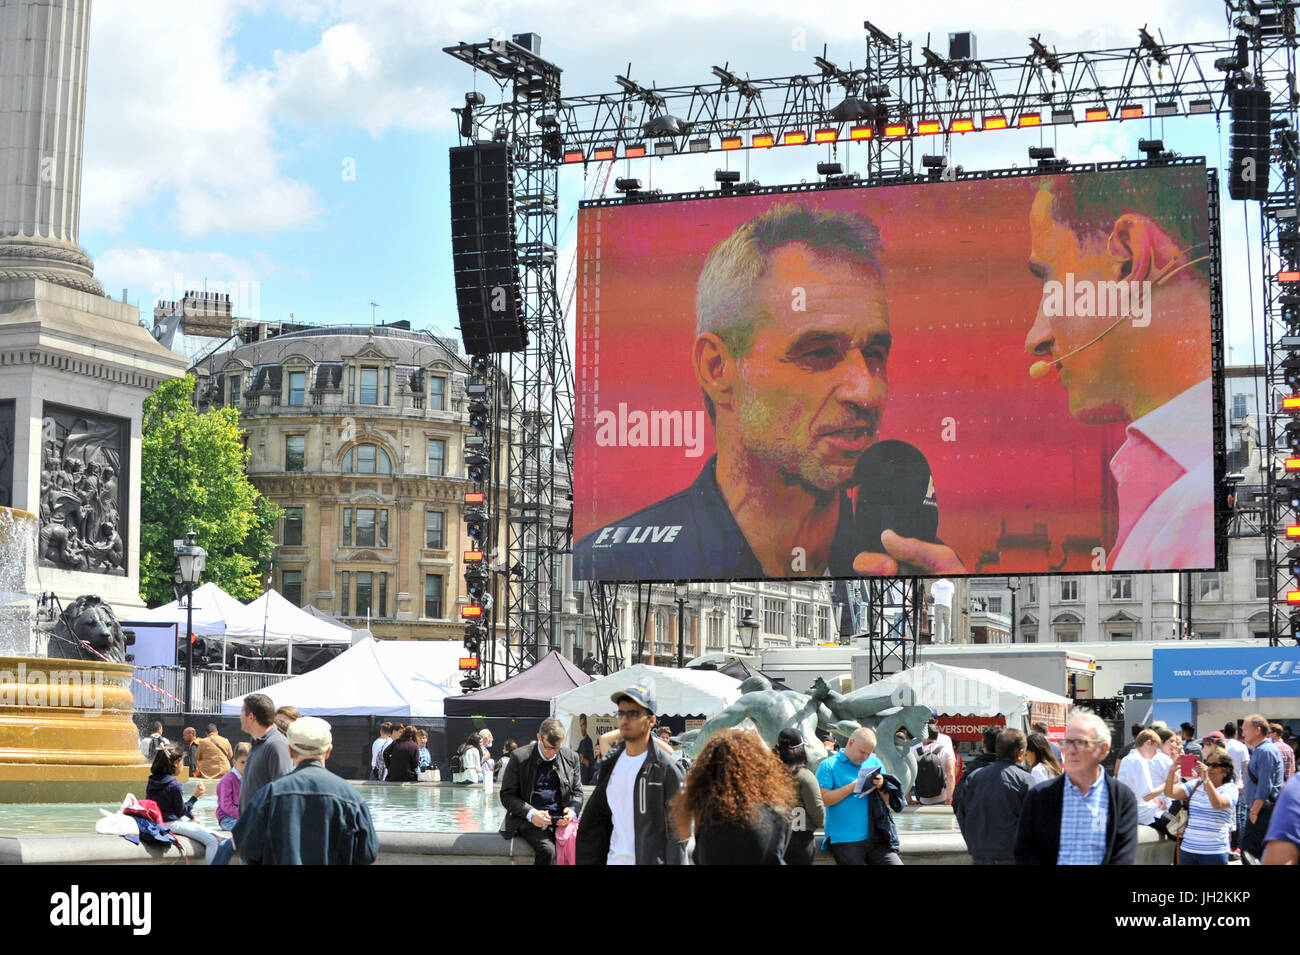 London, UK.  12 July 2017.  A giant screen shows activities on stage.  Formula One racing comes to Trafalgar Square and Whitehall for a promotional event called F1LiveLondon ahead of the British Grand Prix at Silverstone.   Credit: Stephen Chung / Alamy Live News Stock Photo